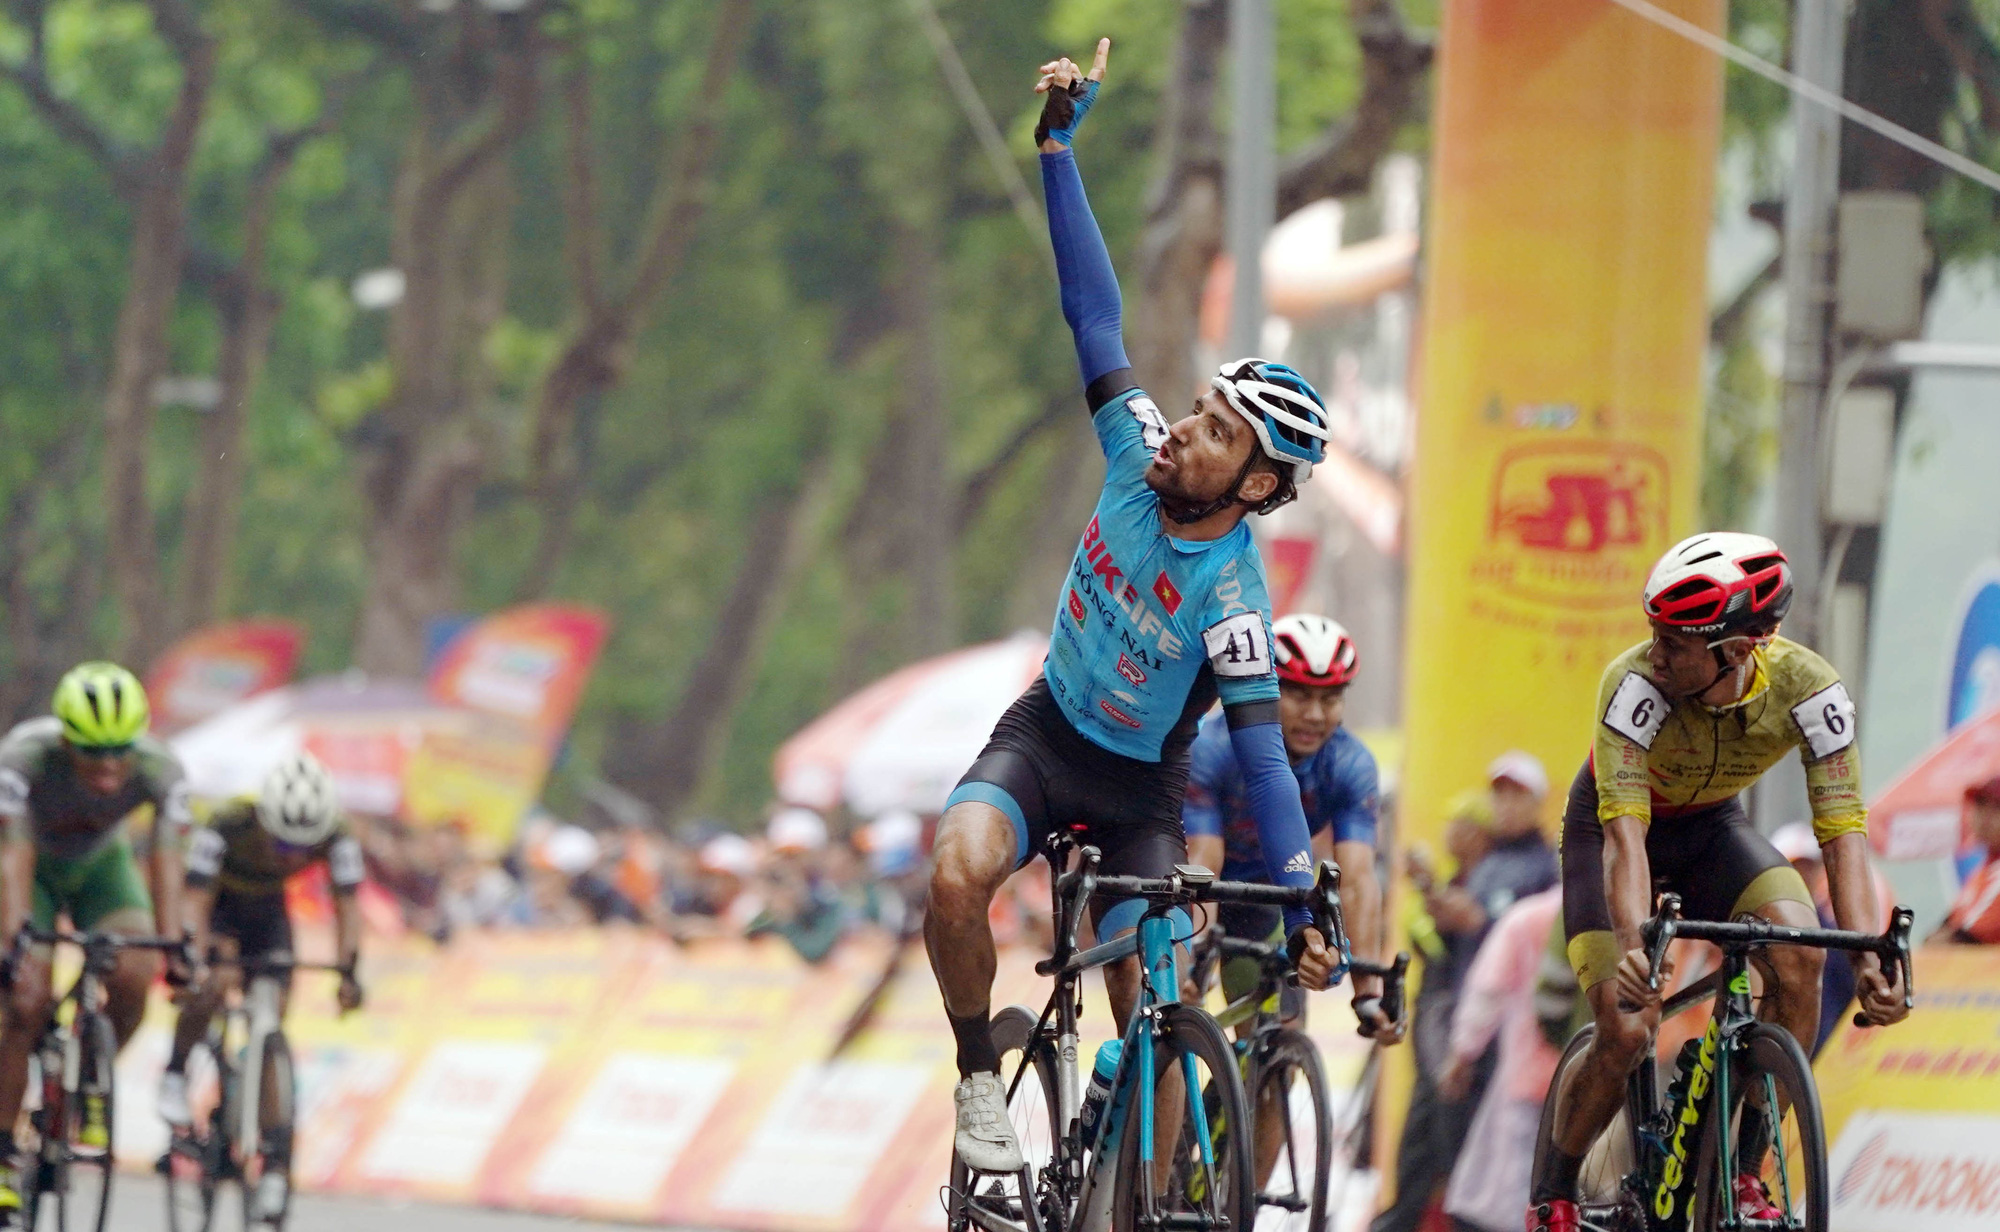 Former French men’s U23 national team member shines in cycling race around Hanoi lake